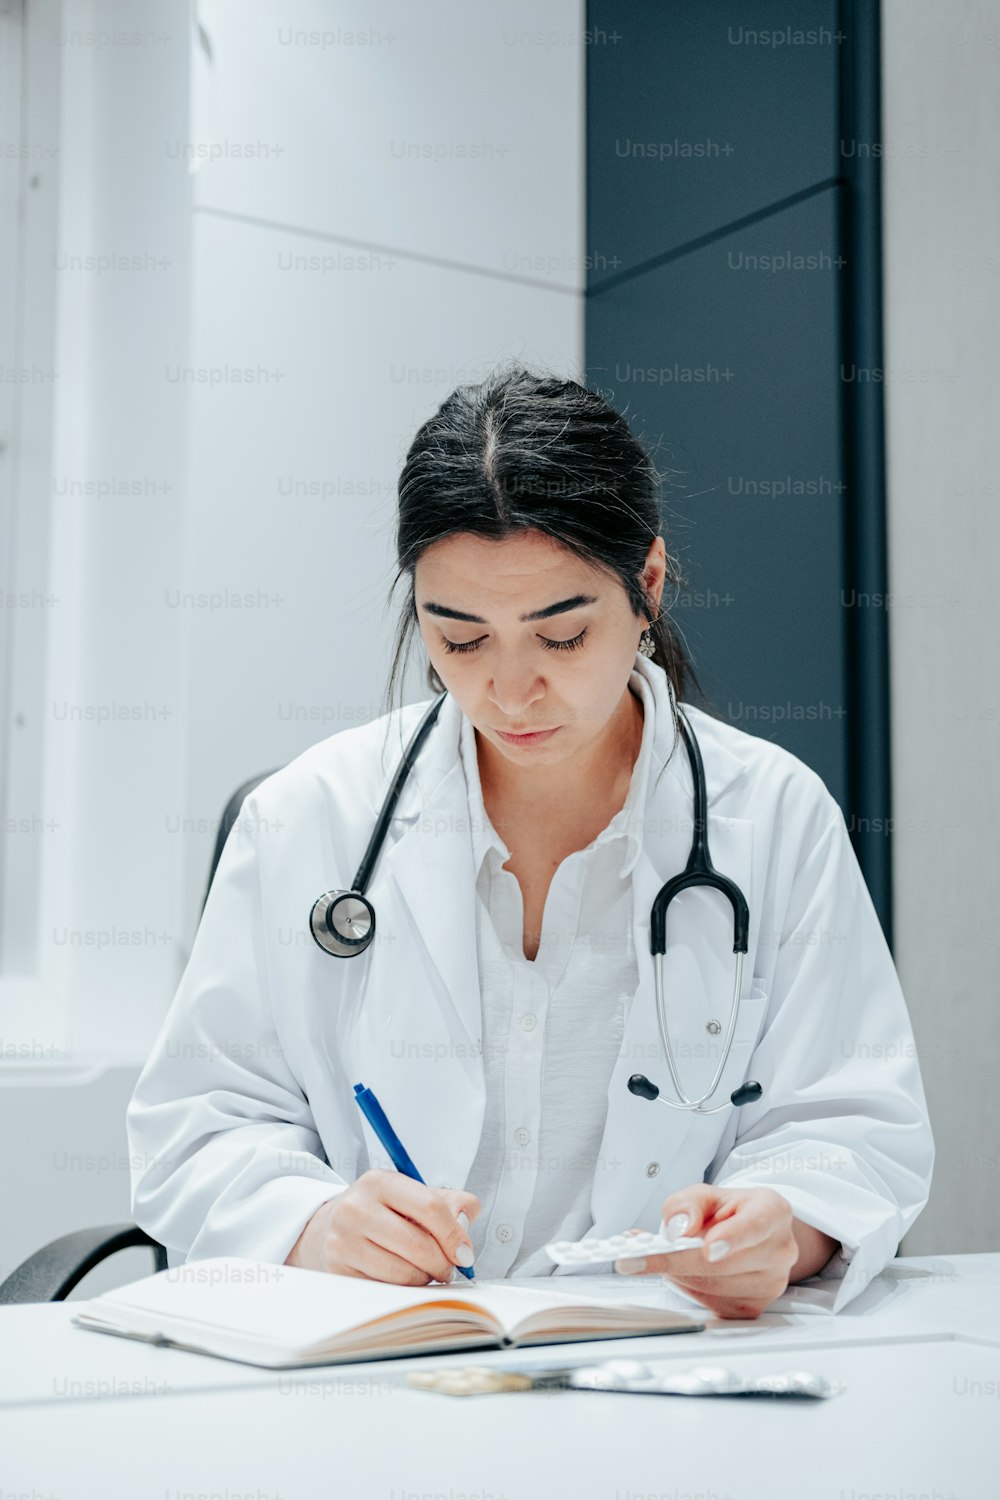 a woman in a white lab coat writing on a book